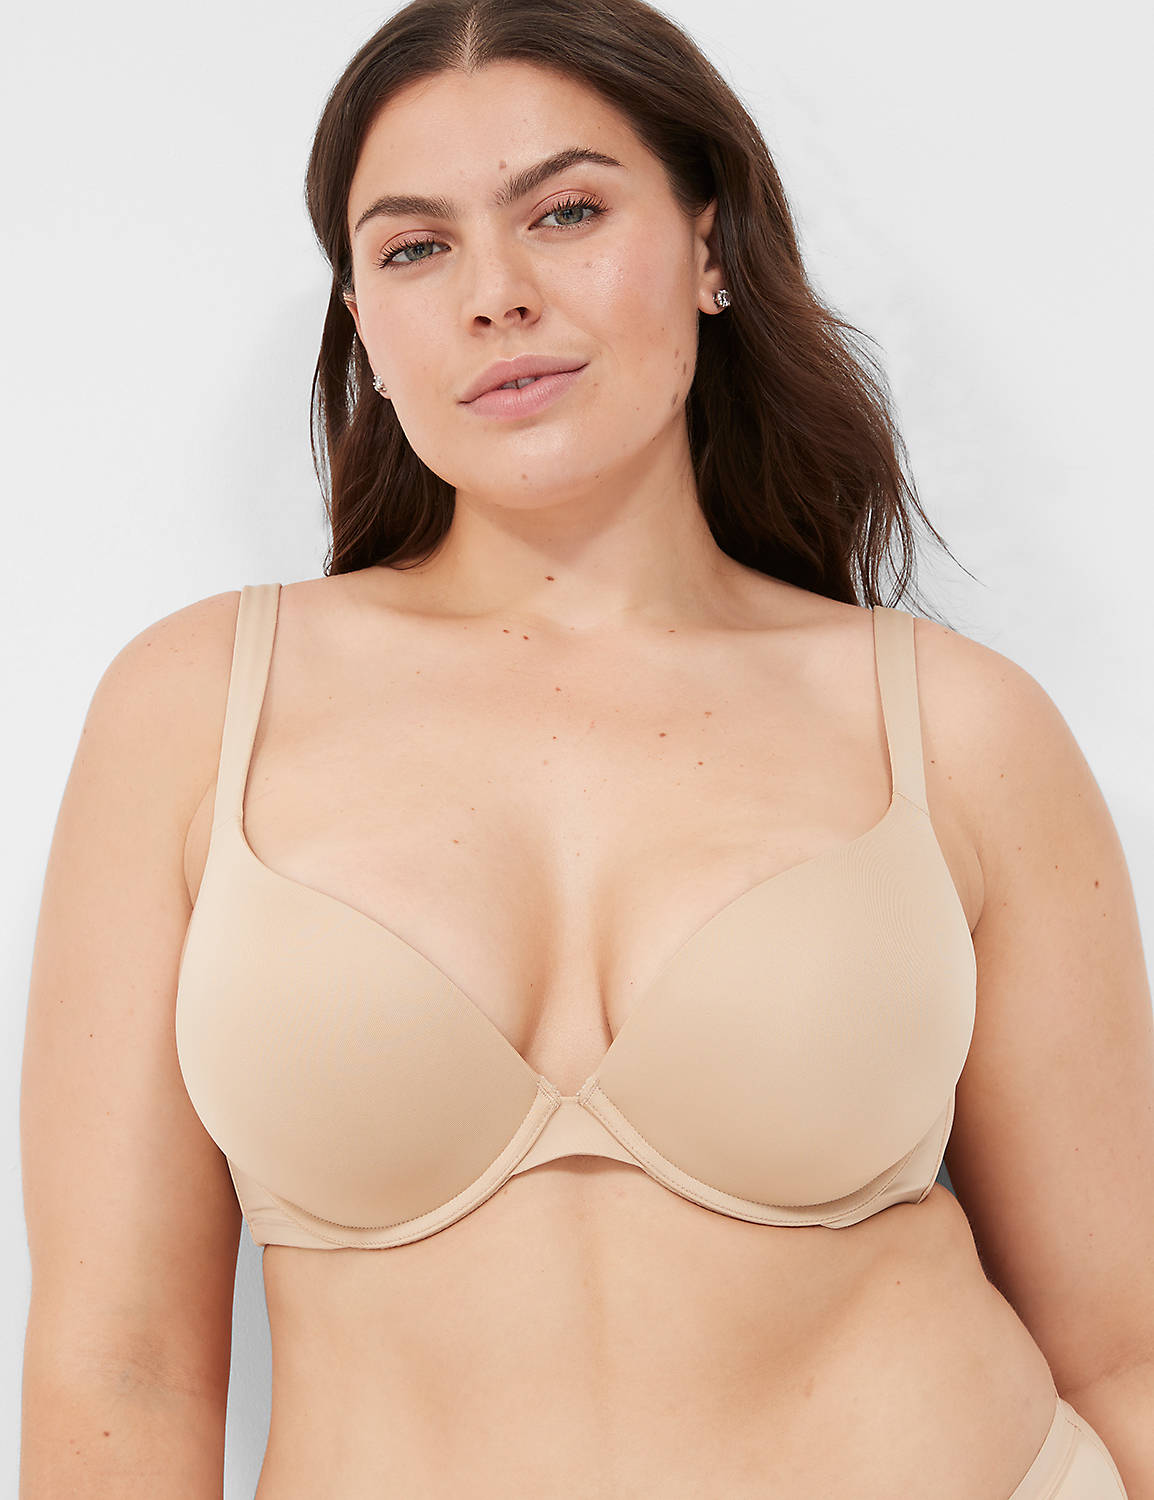 Underwire in 48DD Bra Size C Cup Sizes Nude Brigette by Leading Lady  Contour Bras